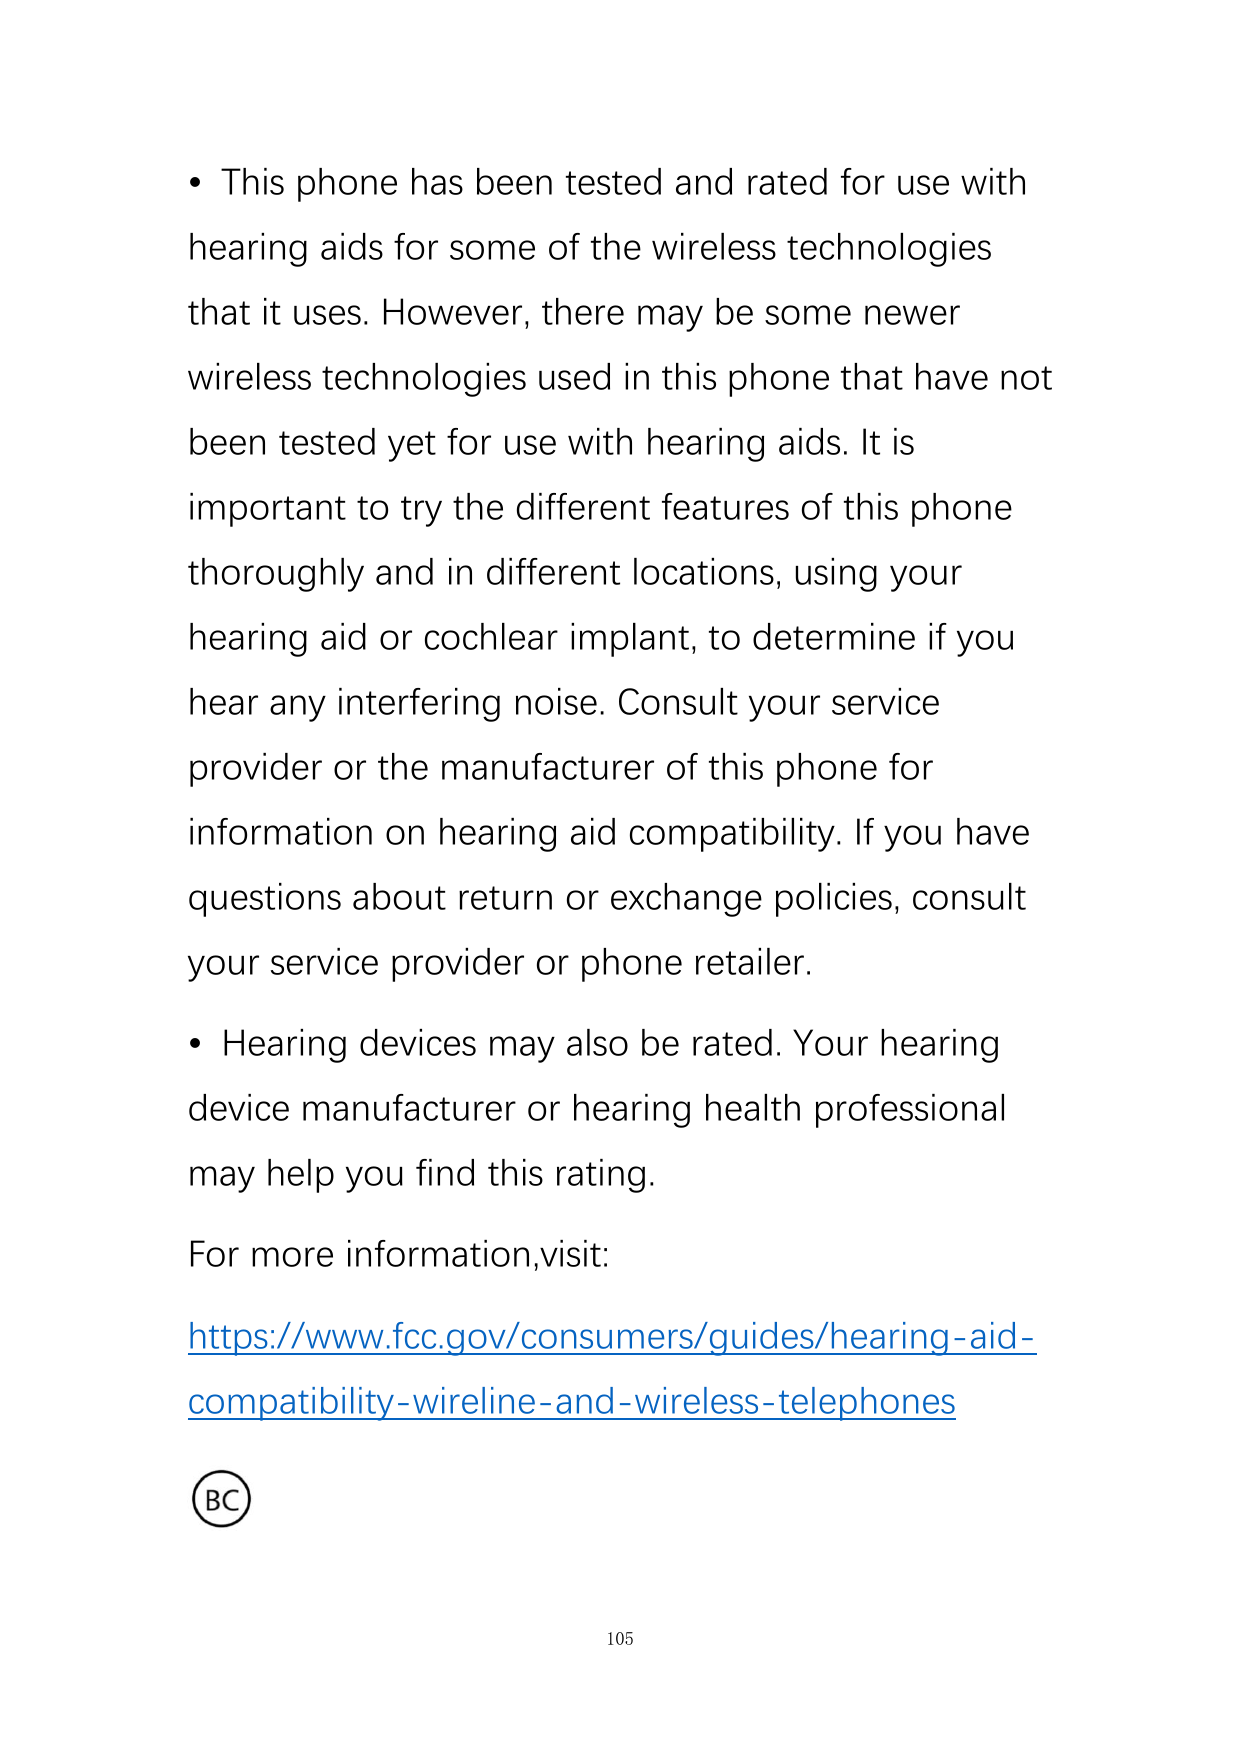 • This phone has been tested and rated for use withhearing aids for some of the wireless technologiesthat it uses. However, ther